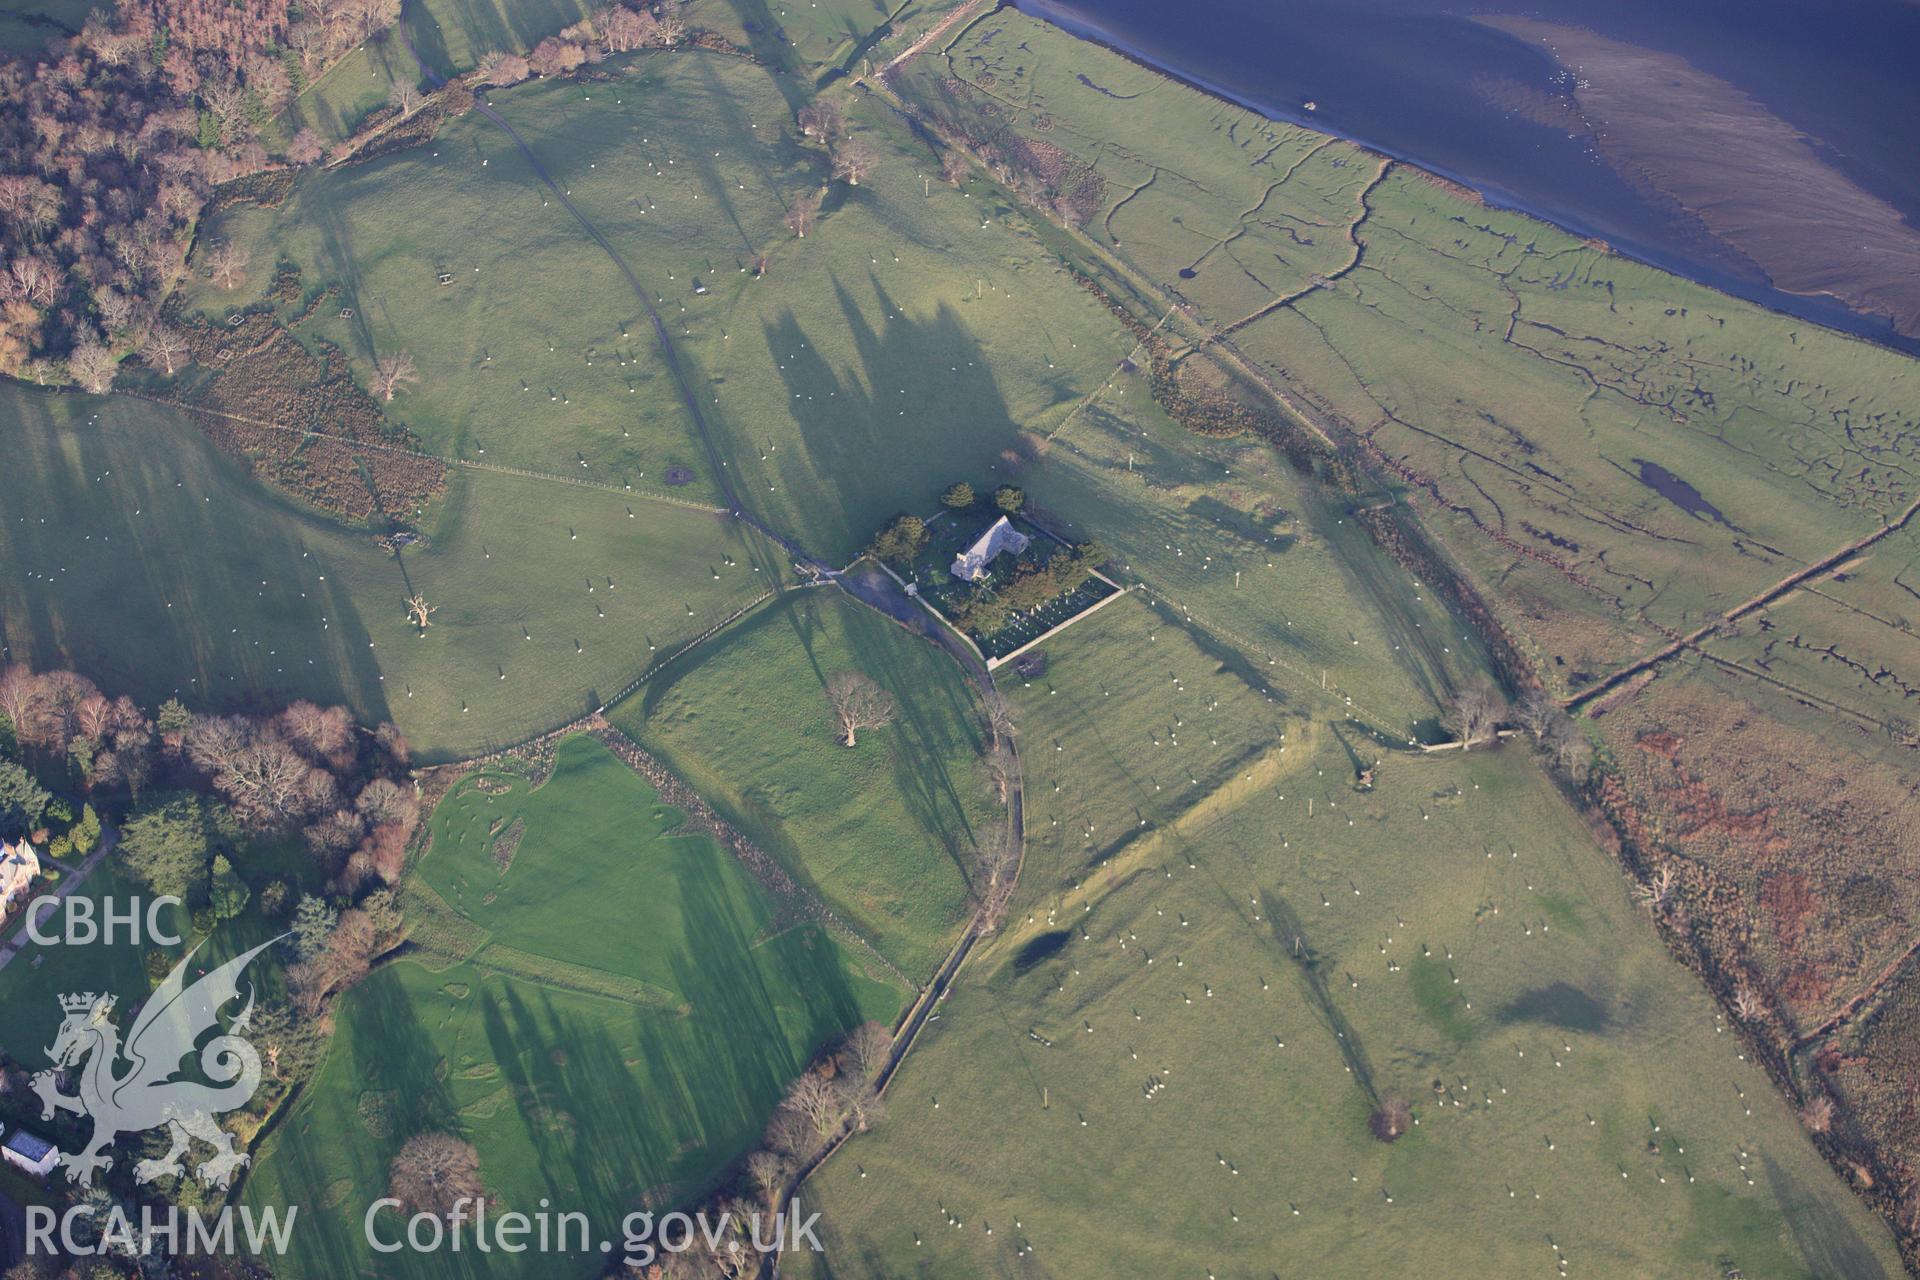 RCAHMW colour oblique aerial photograph of Kanovium (or Canovium) Roman Military Settlement at Caerhun. Taken on 10 December 2009 by Toby Driver